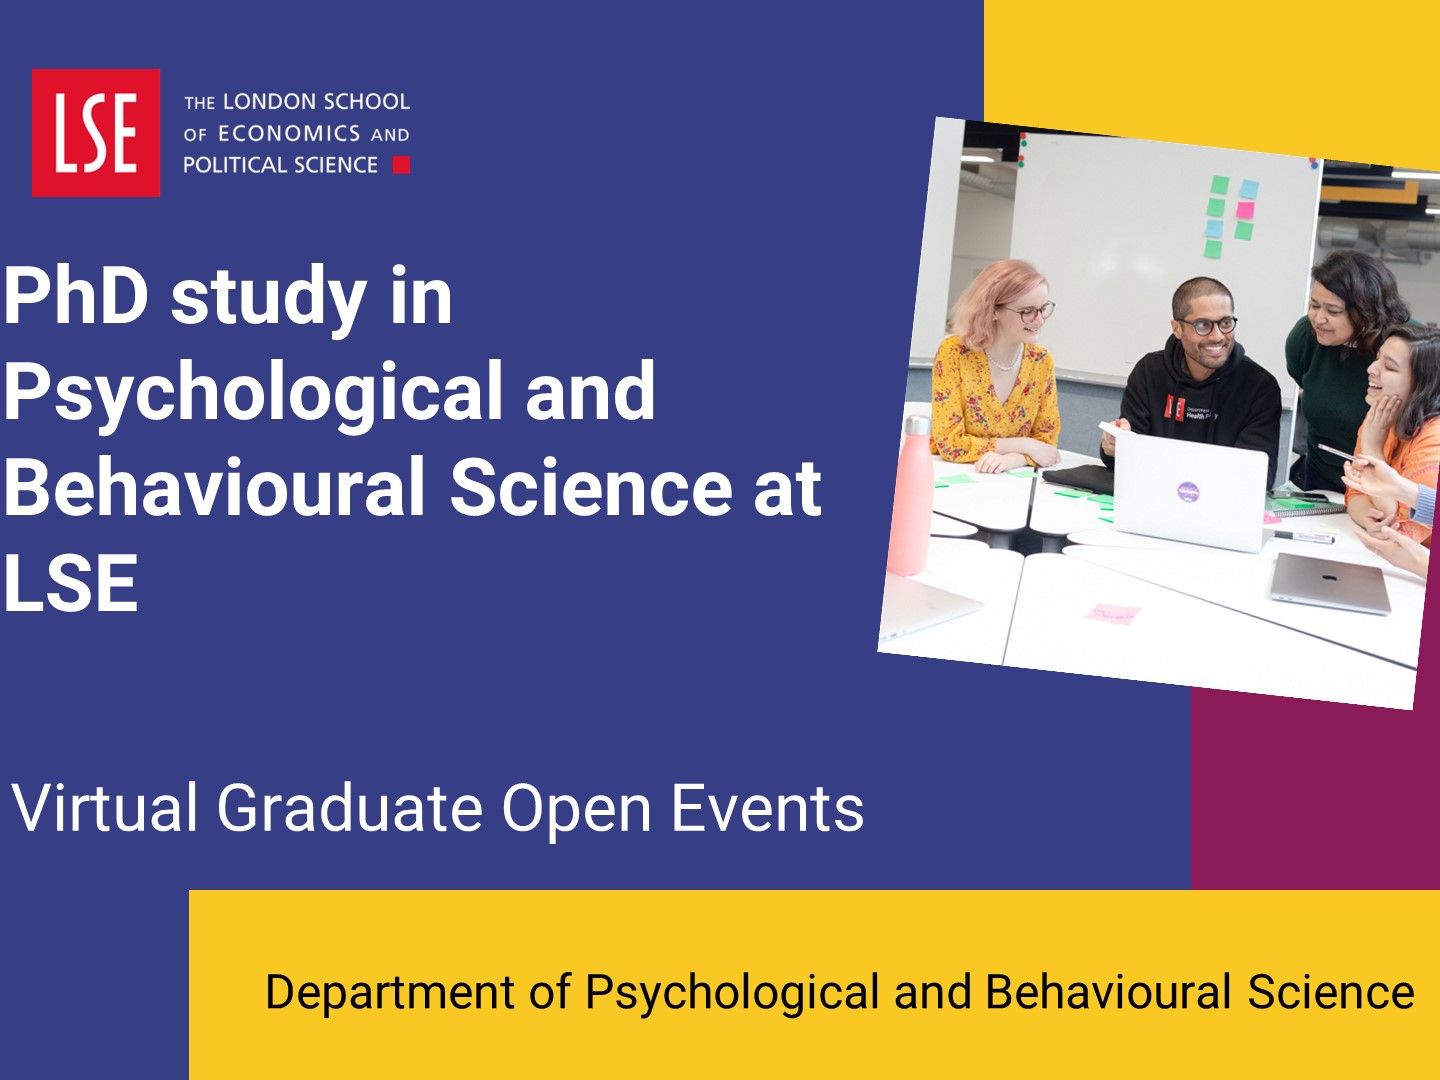 Introduction to PhD study in Psychological and behavioural science